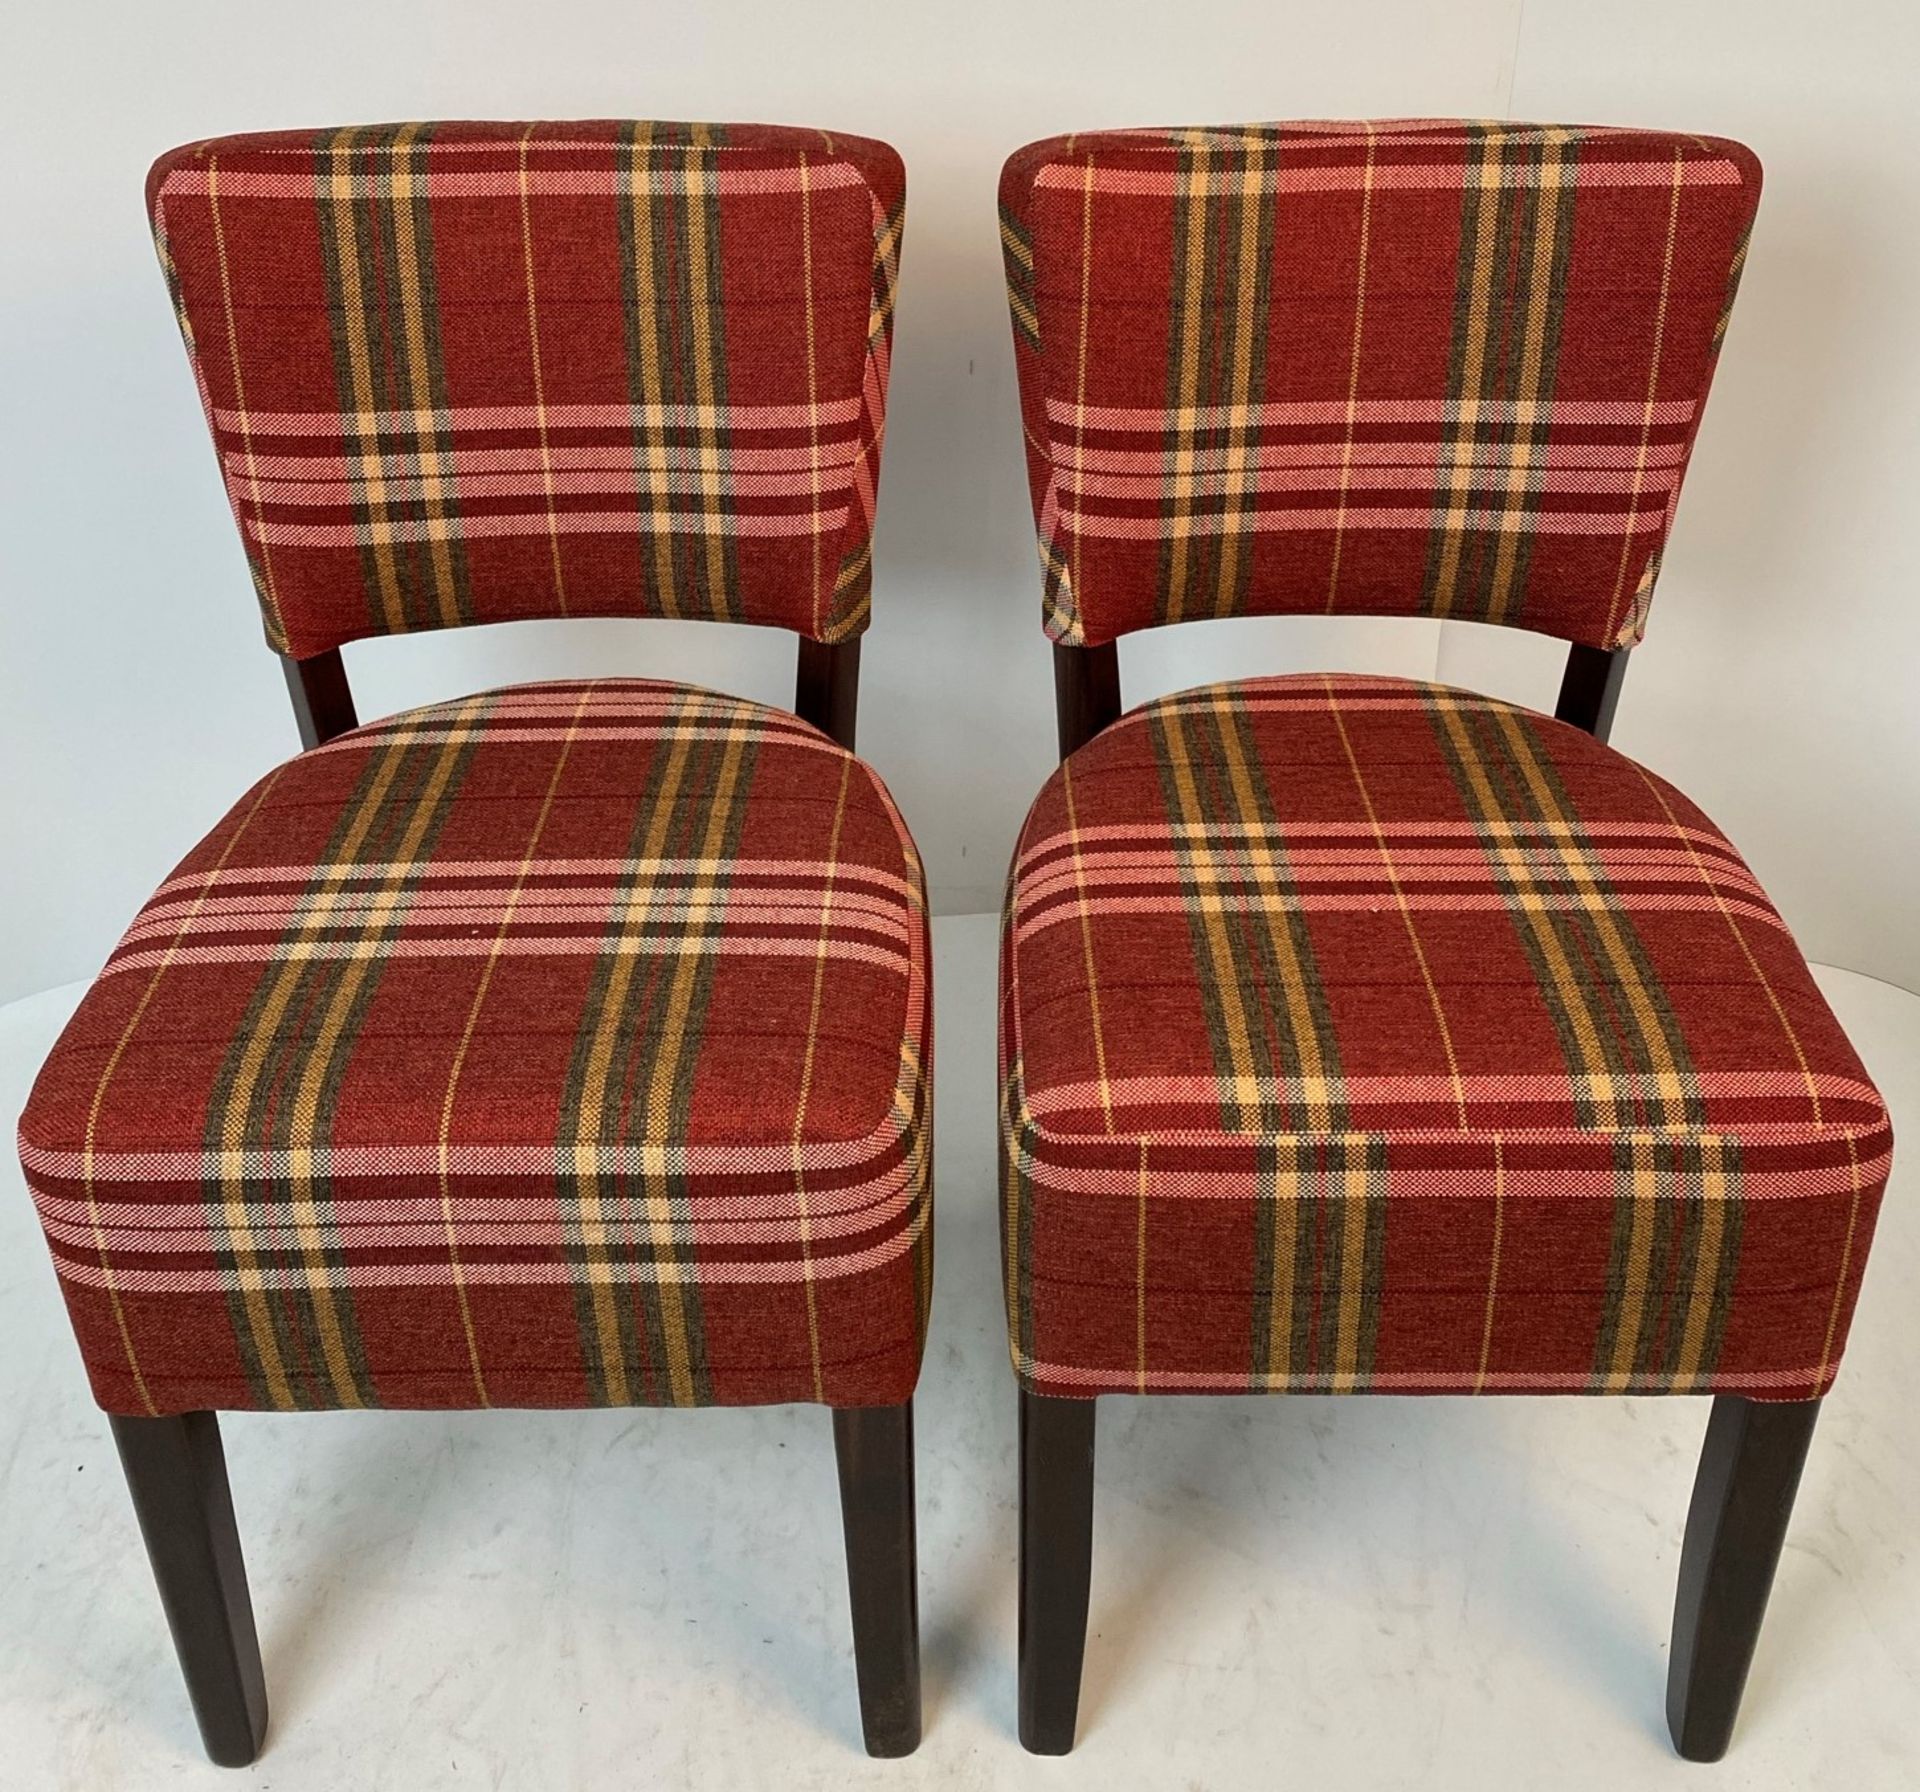 2 x Memphis Panaz Calroust Hunter Check Red Amber 441 side/dining chairs with walnut coloured